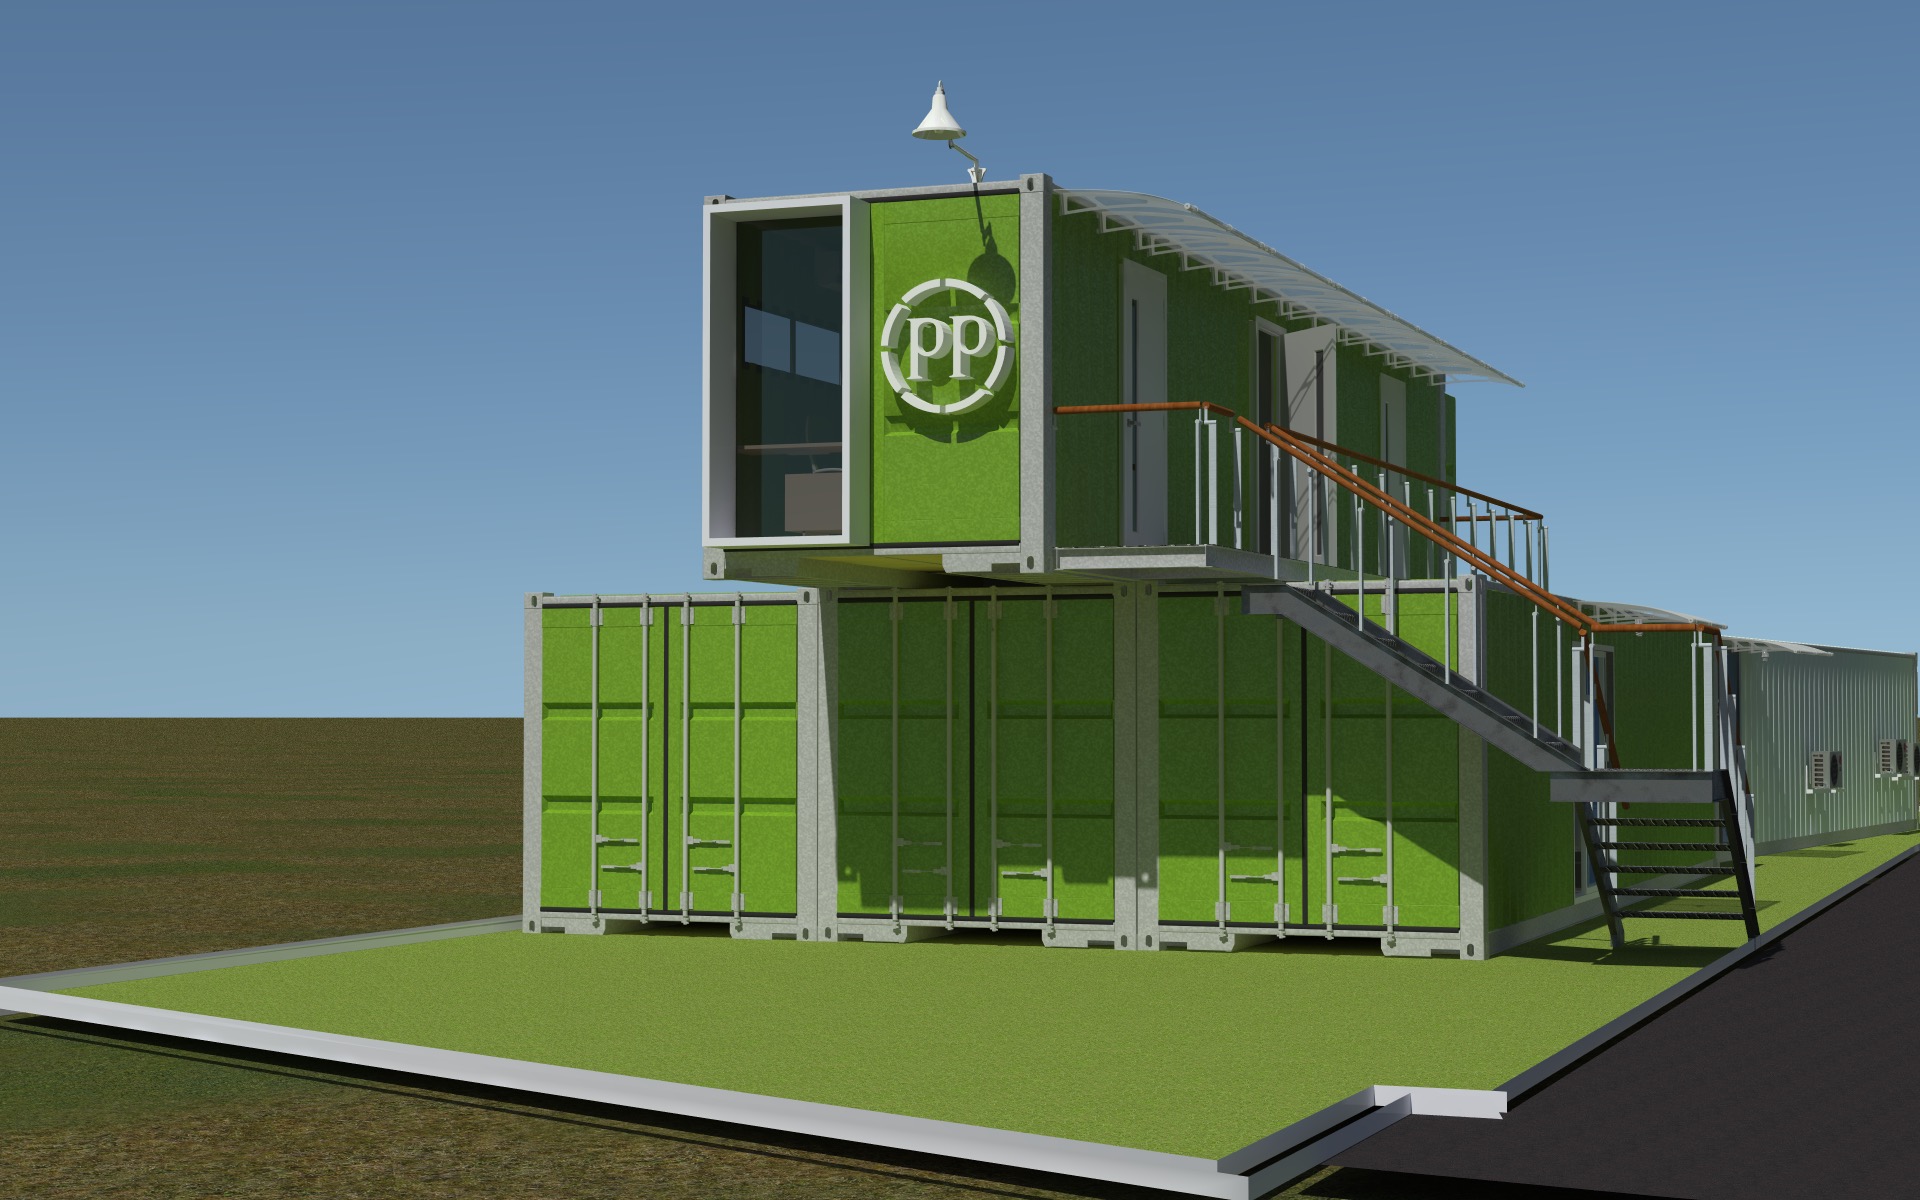 Architecture container temporary office PT PP